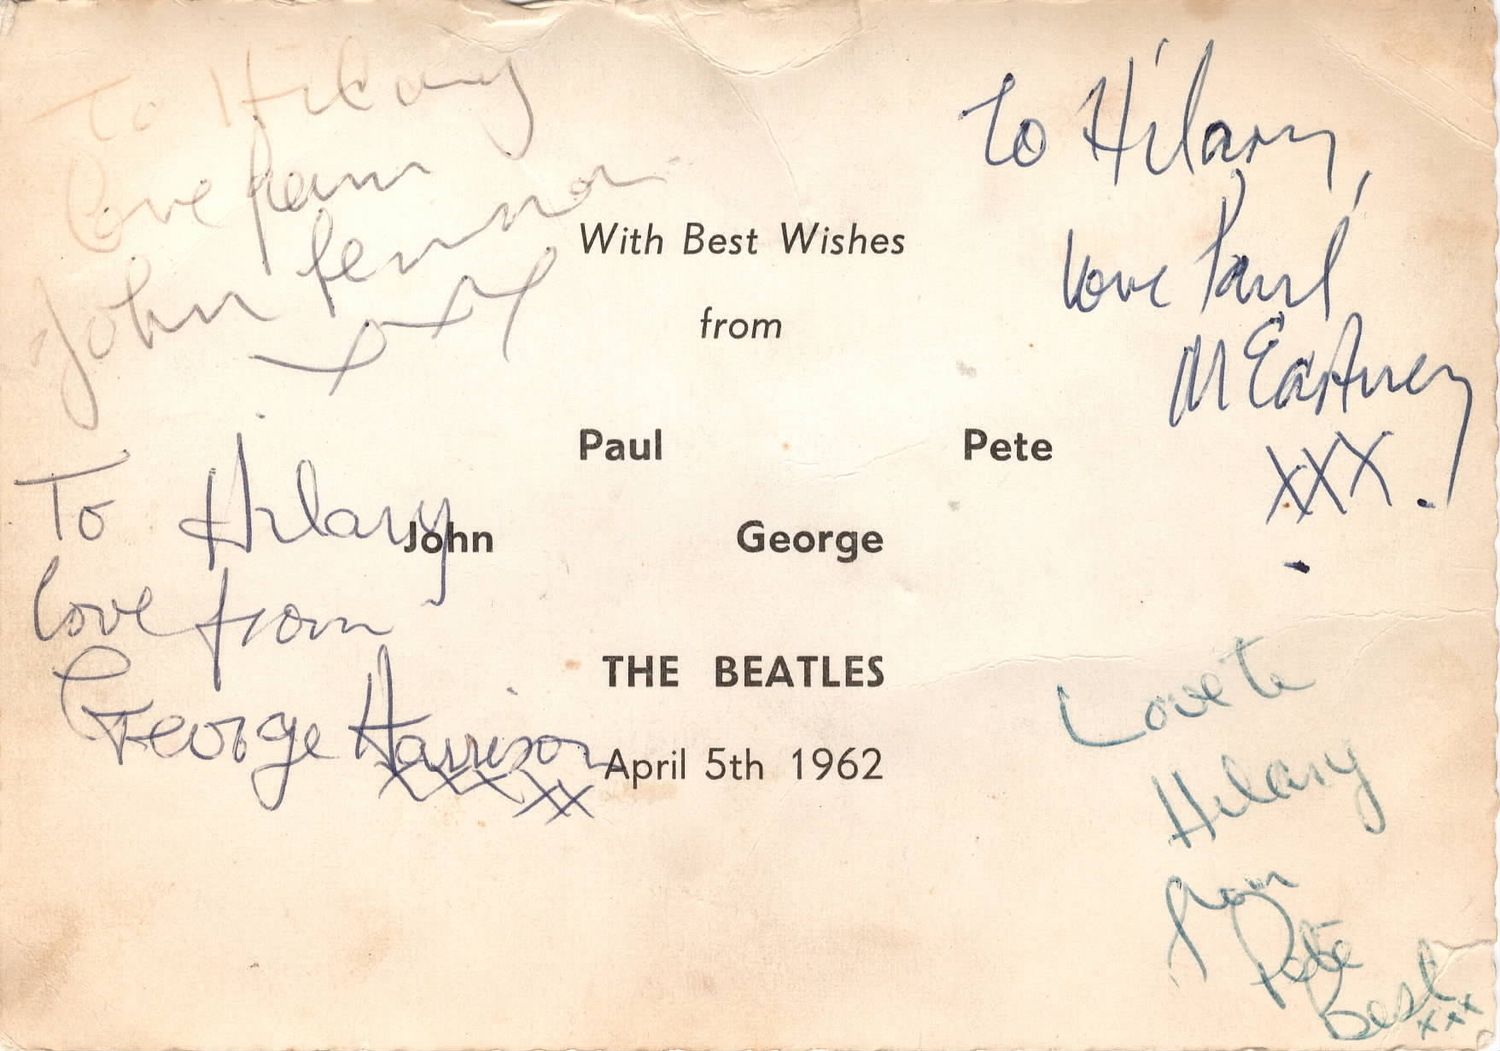 More valuable than the publicity photo are the autographs on the back of the four members of the band at the time, John Lennon, Paul McCartney, George Harrison, and Pete Best. Ringo Starr did not join the band for another four months. COURTESY HILARY COLLINS